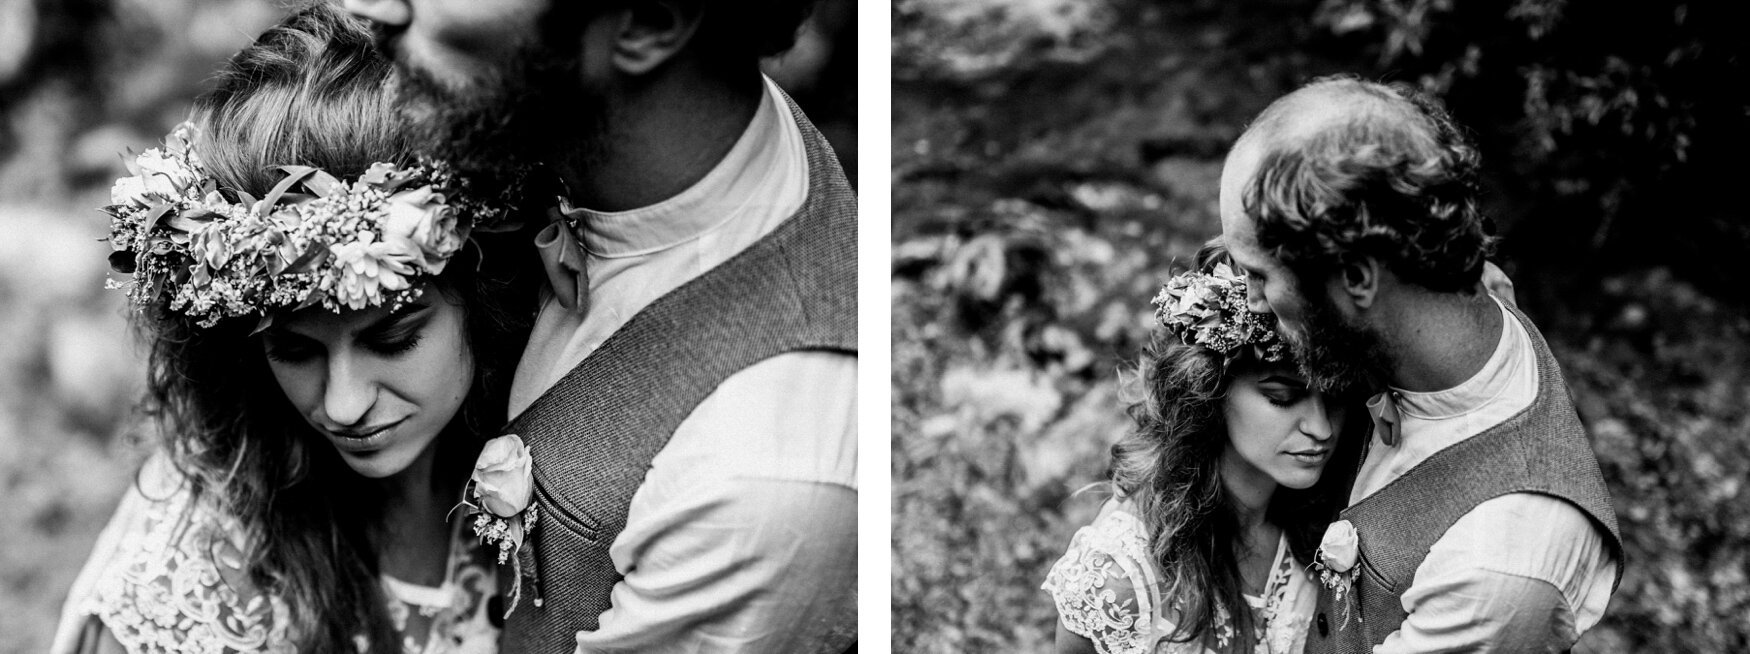 1 DIY rustic bohemian hipster wedding in the mountains 069.jpg